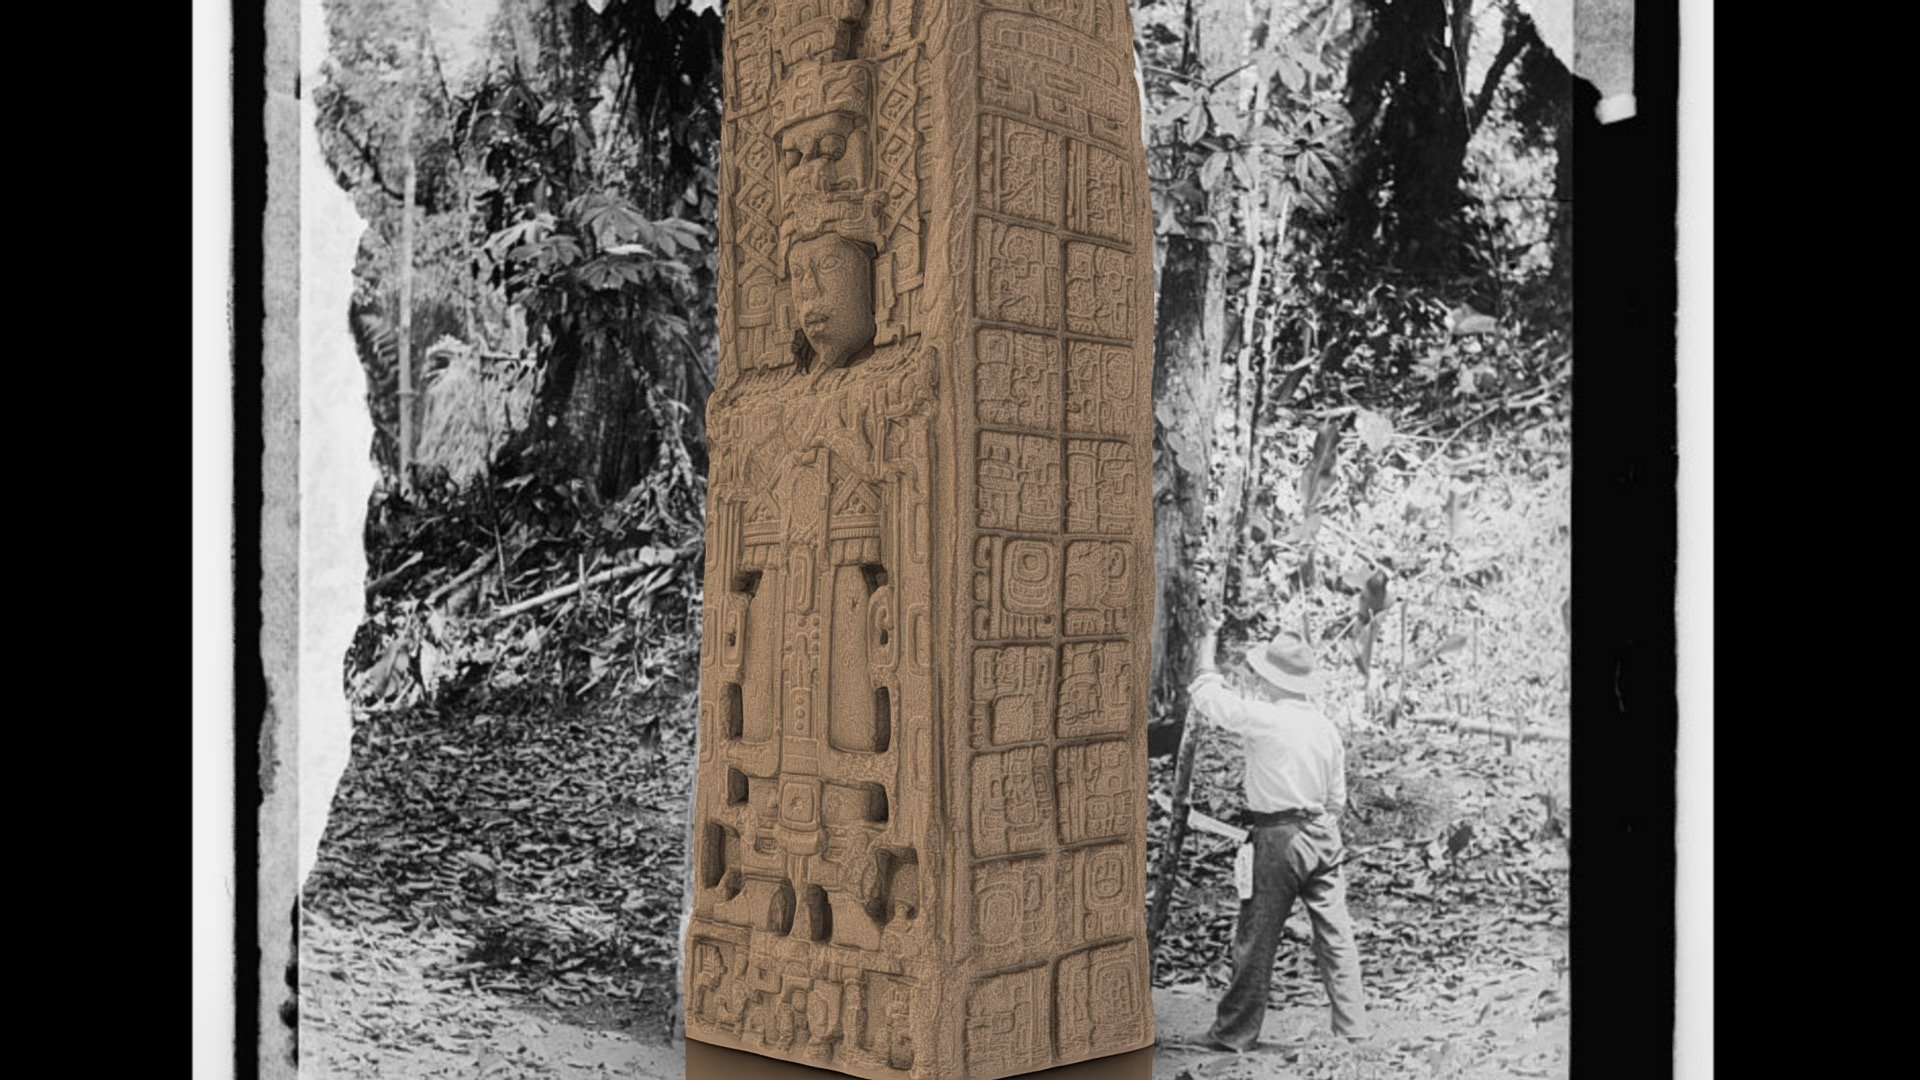 Ornately carved sandstone stela from the Archaeological Park and Ruins of Quiriguá, an inscribed UNESCO World Heritage Site in the Department of Izabal, Guatemala. The piece was 3D laser scanned in 2019 during the extensive documentation survey at the site by our USF Libraries DHHC team. We utilized structured light scanners at various resolutions on this monument as well as imaging and longer range laser scanning to capture landscape context details.

For more information on the iconography, see: Matthew Looper's Quirigua: A Guide to an Ancient Maya City, 2007 for more discussion and additional references. For more on our 3D project: [https://dhhc.lib.usf.edu/project/the-quirigua-3d-project/]. 

Background image- 1947, Herbert A. French, Library of Congress. [https://lccn.loc.gov/2016821500].

This project is in collaboration with Oswaldo Gomez, Administrador at Parque Arqueológico Quiriguá 3d model